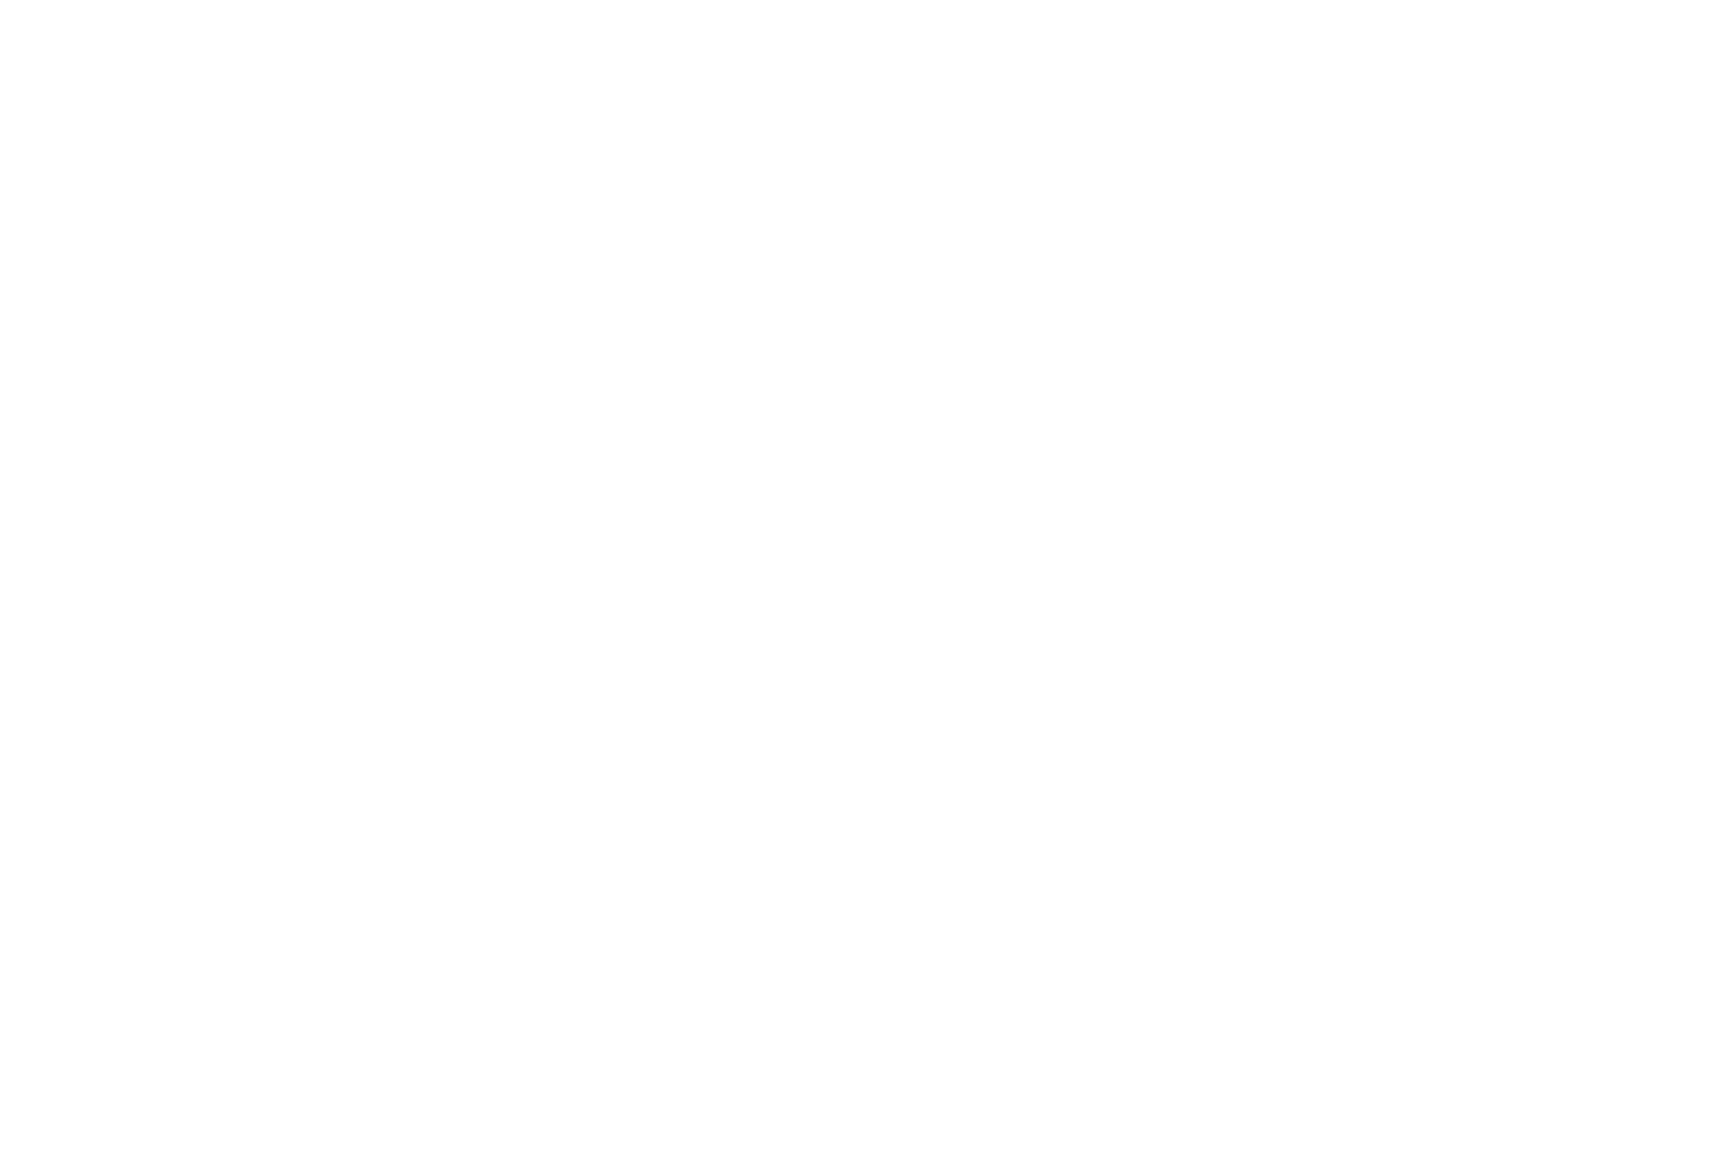 _OFFICIAL SELECTION - CAAMFest - 2019